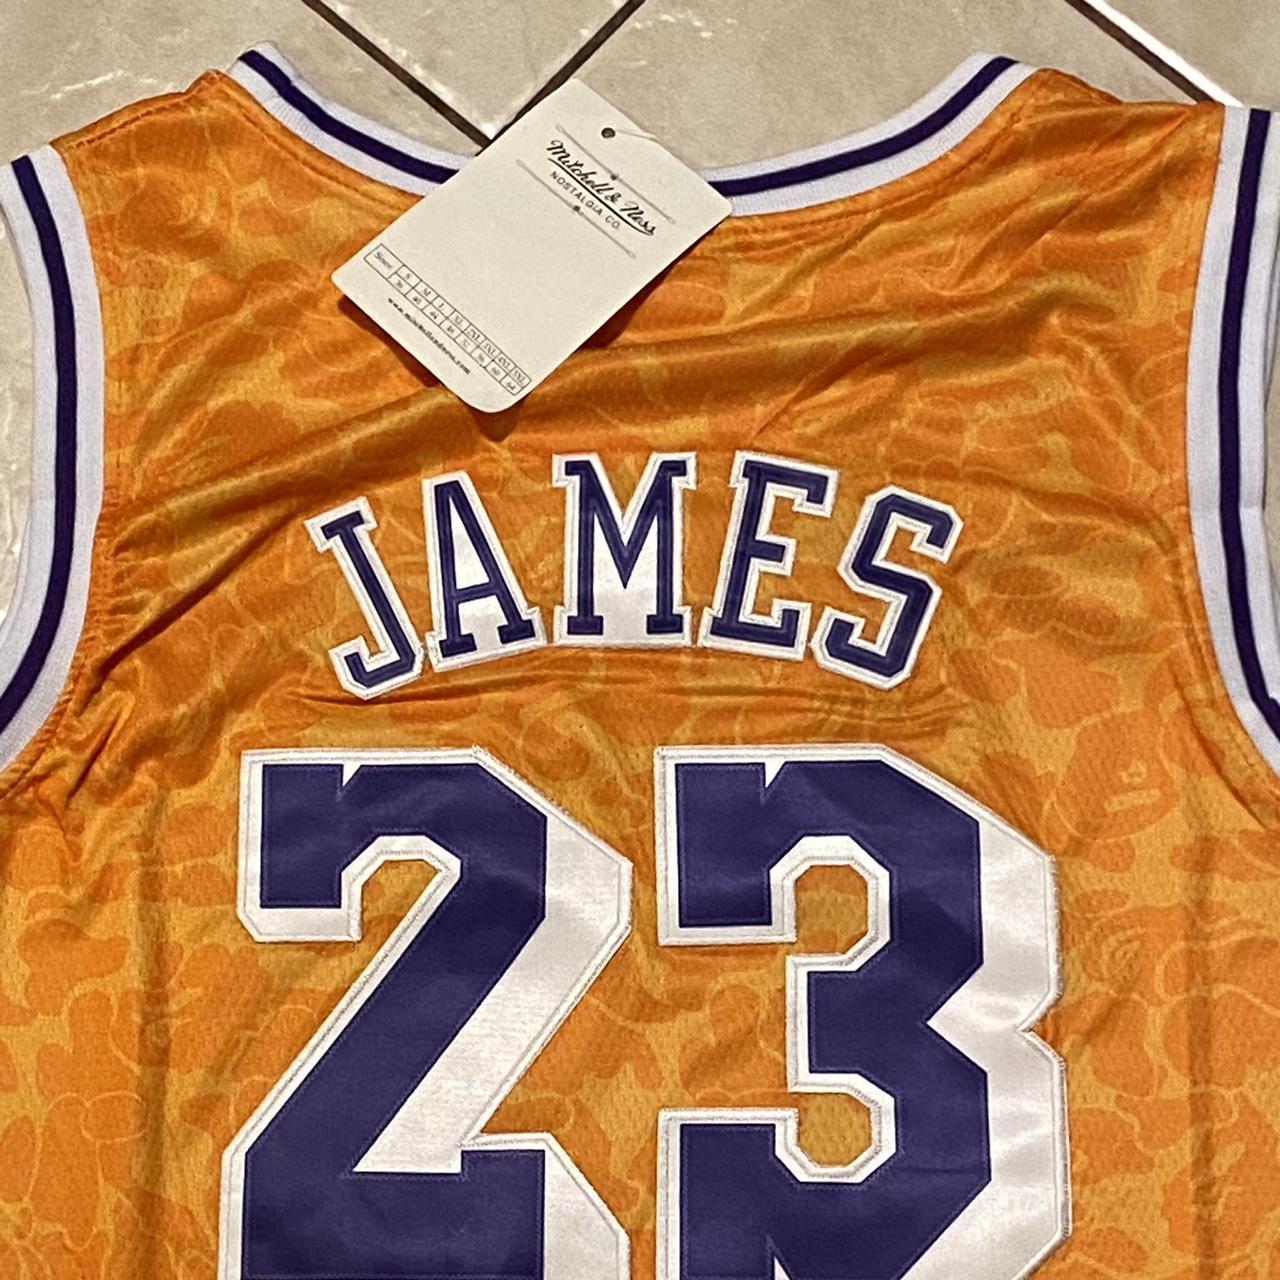 LAKERS LEBRON JAMES 23 HOME JERSEY STRAIGHT FROM THE - Depop